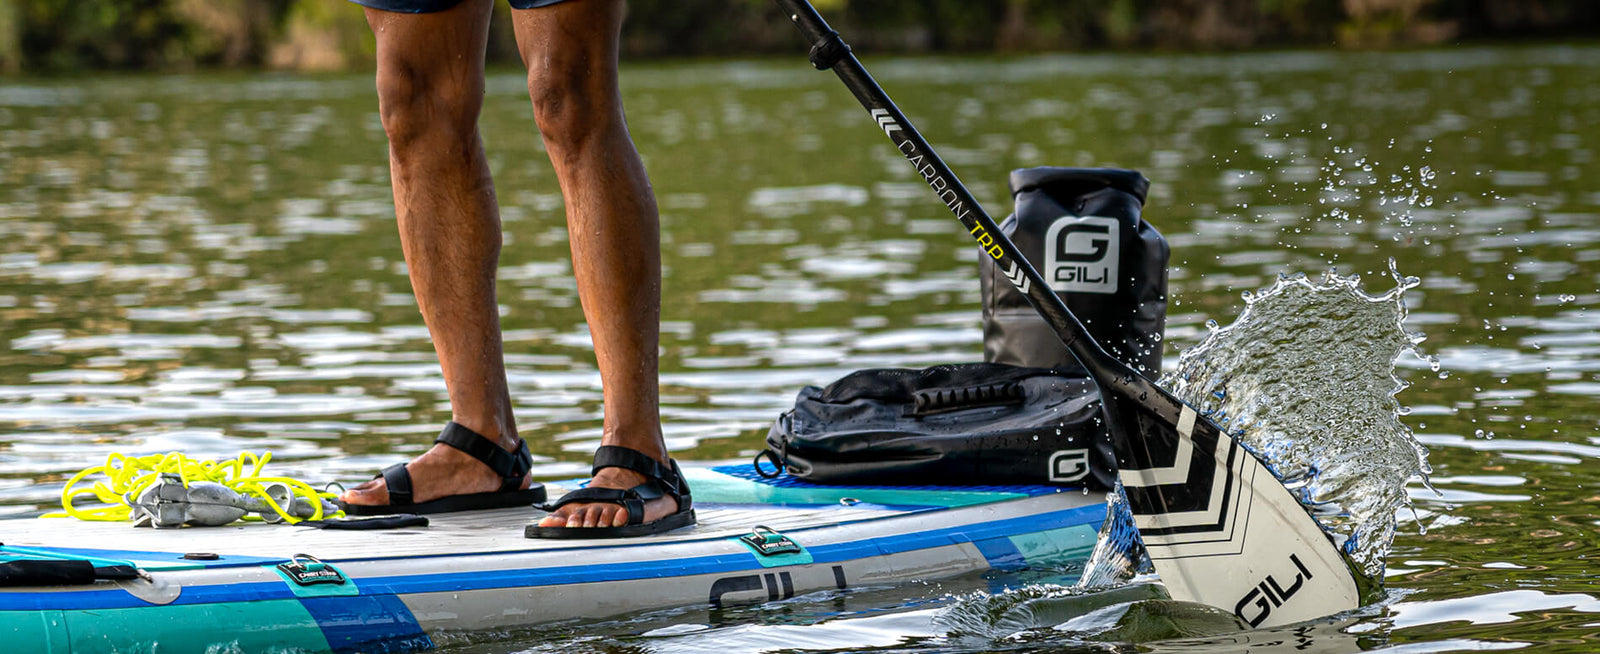 Stand Up Paddle Board Gear: The Essentials & Checklist - Gili